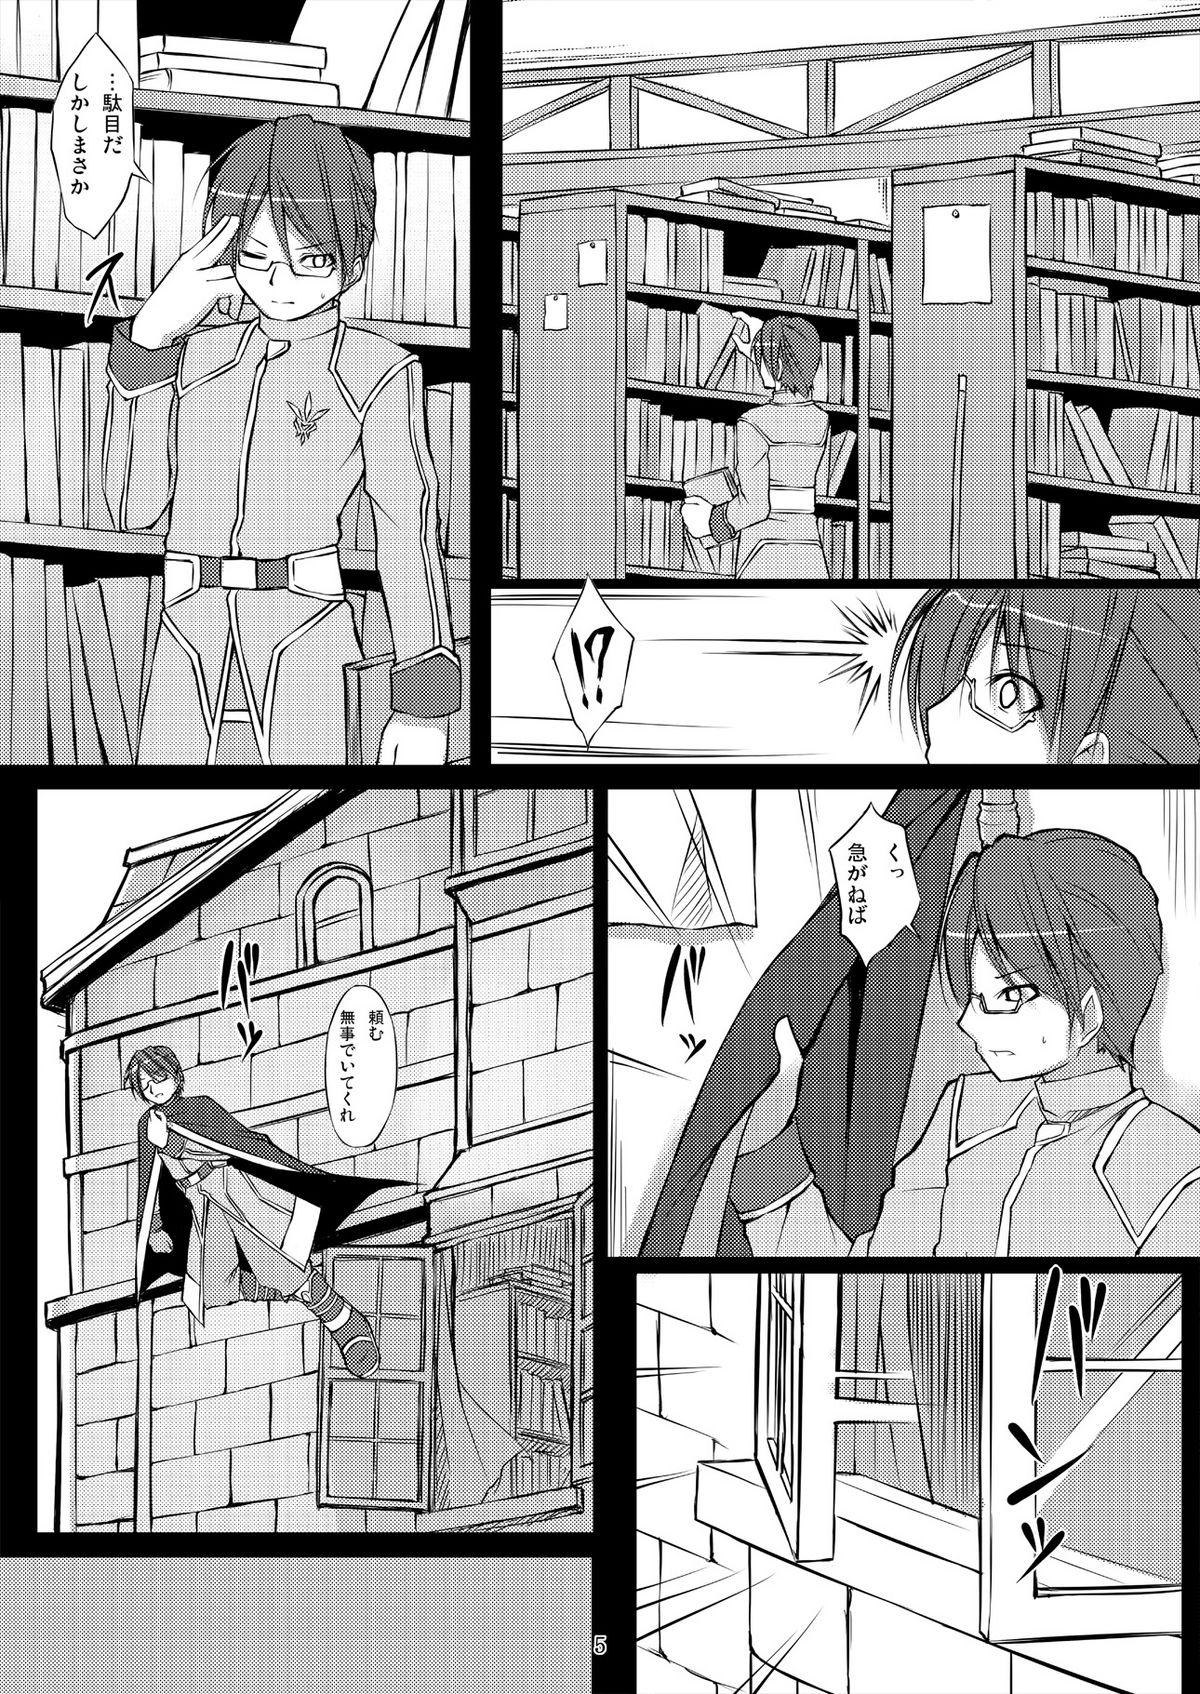 Hair 魔法戦士触獄に堕つ～獄卒の洗礼～ Massages - Page 5